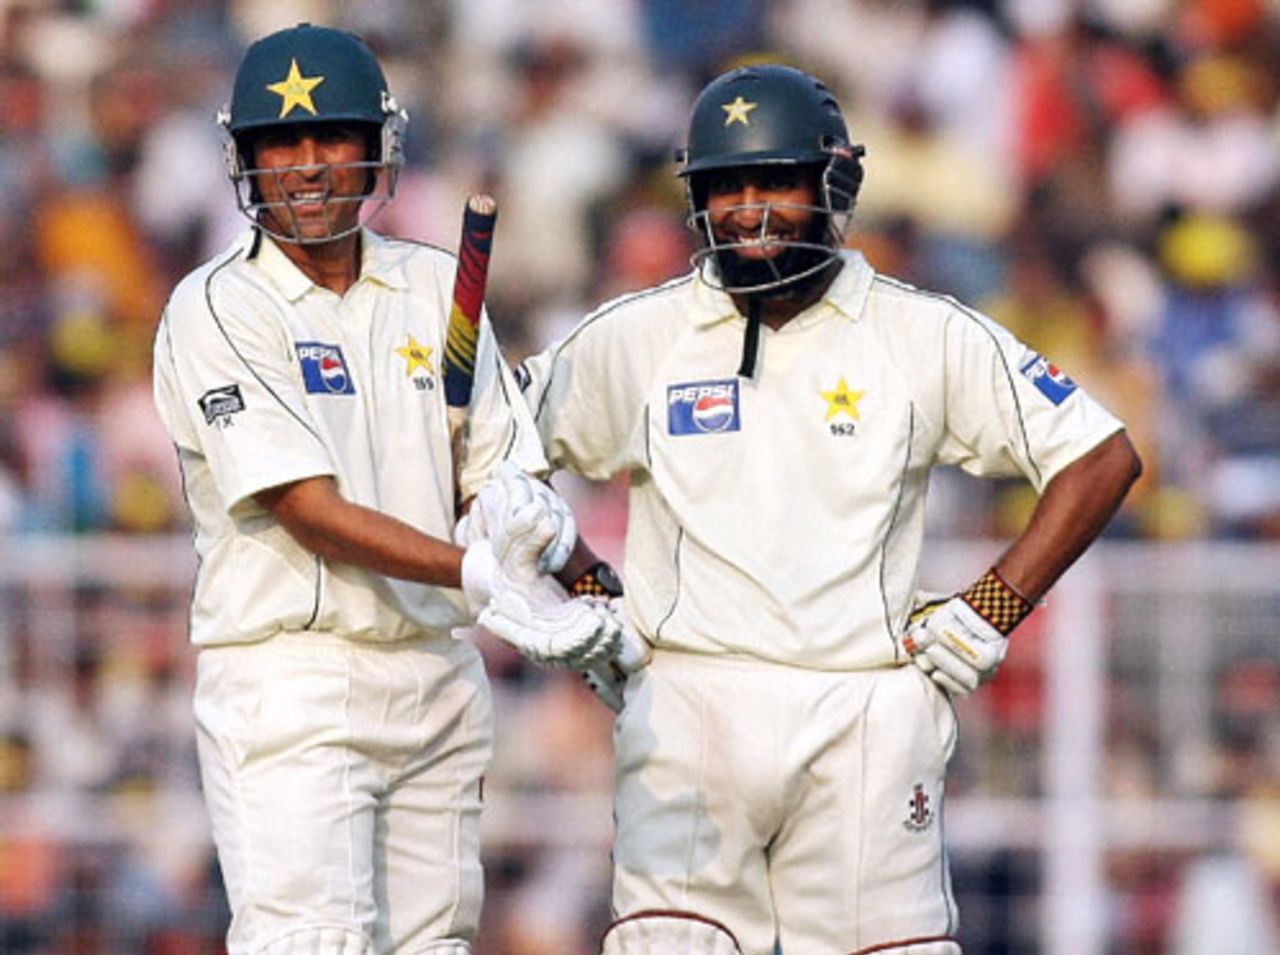 Younis Khan and Mohammad Yousuf put on an unbroken fifth-wicket stand of 136 runs, India v Pakistan, 2nd Test, Kolkata, 5th day, December 4, 2007